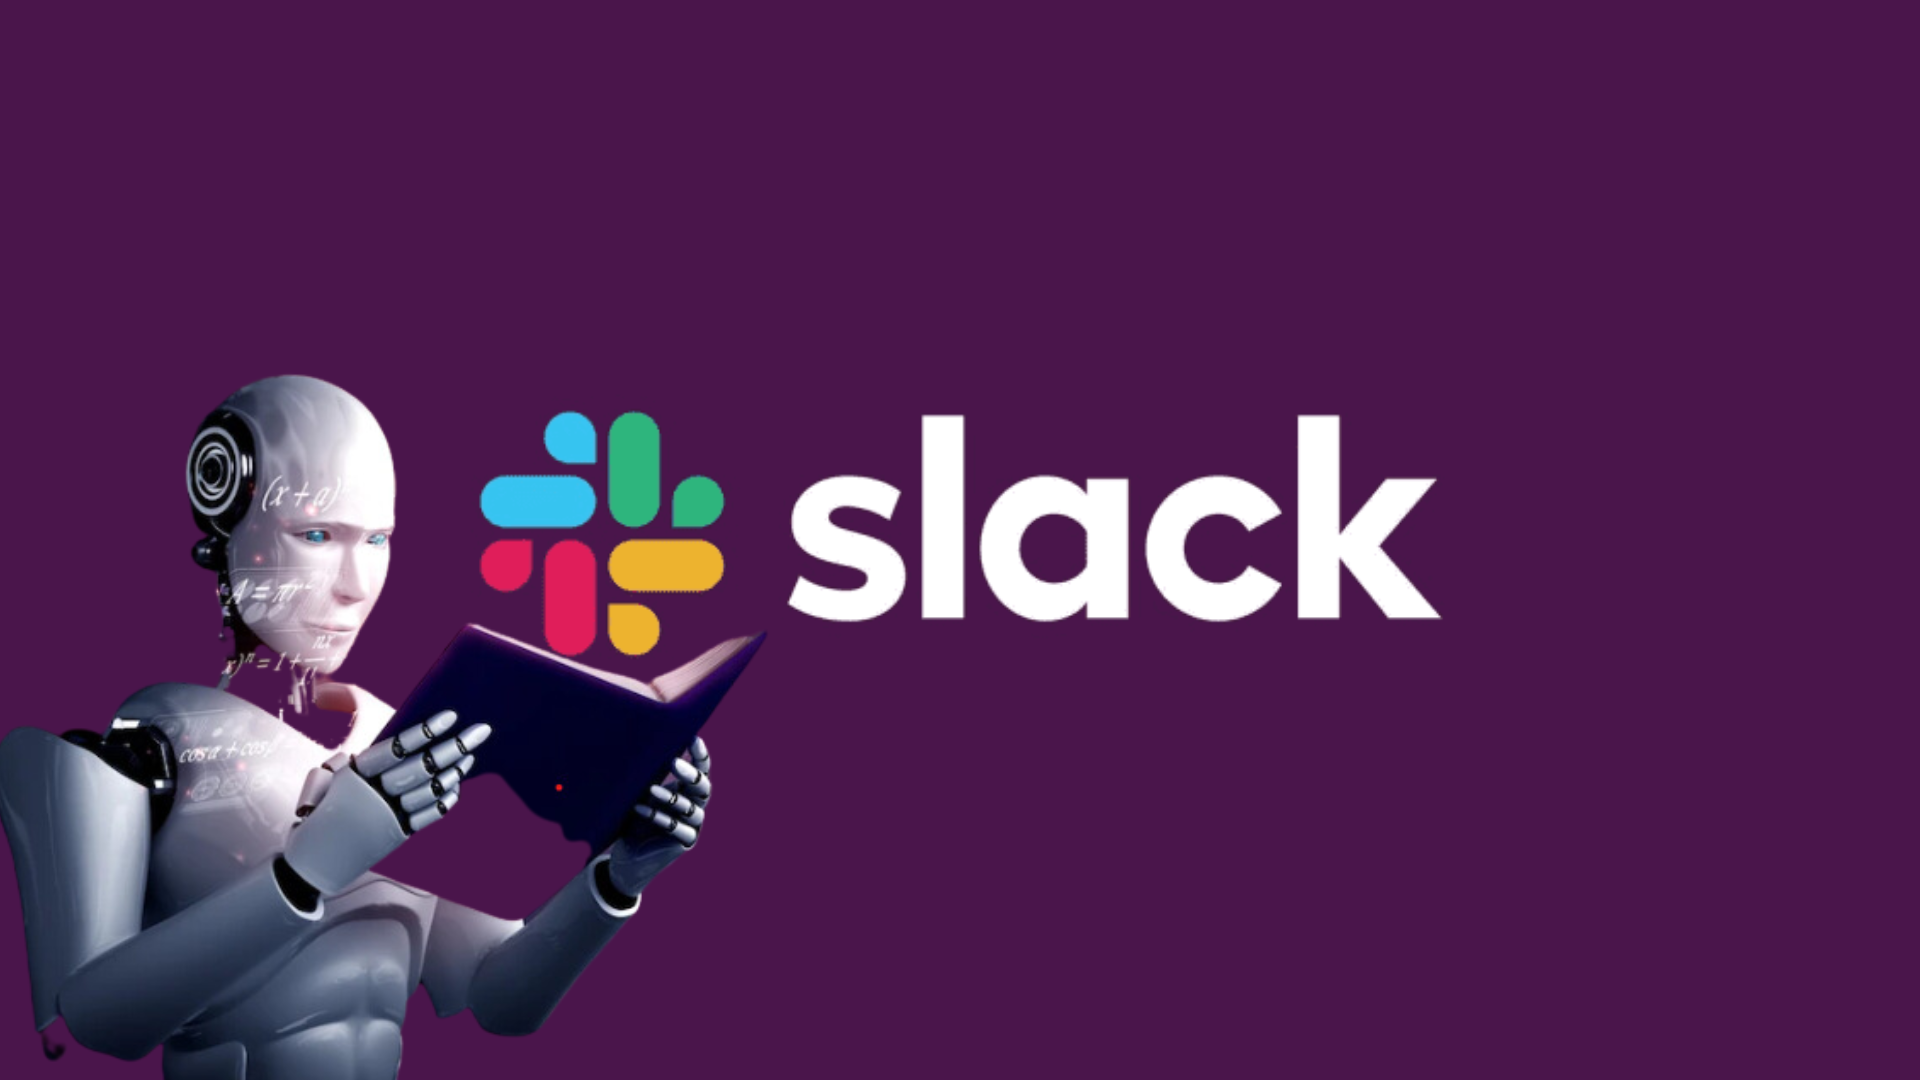 Slack Spying On Your Message: Raises Concerns Over Data Protection And Privacy